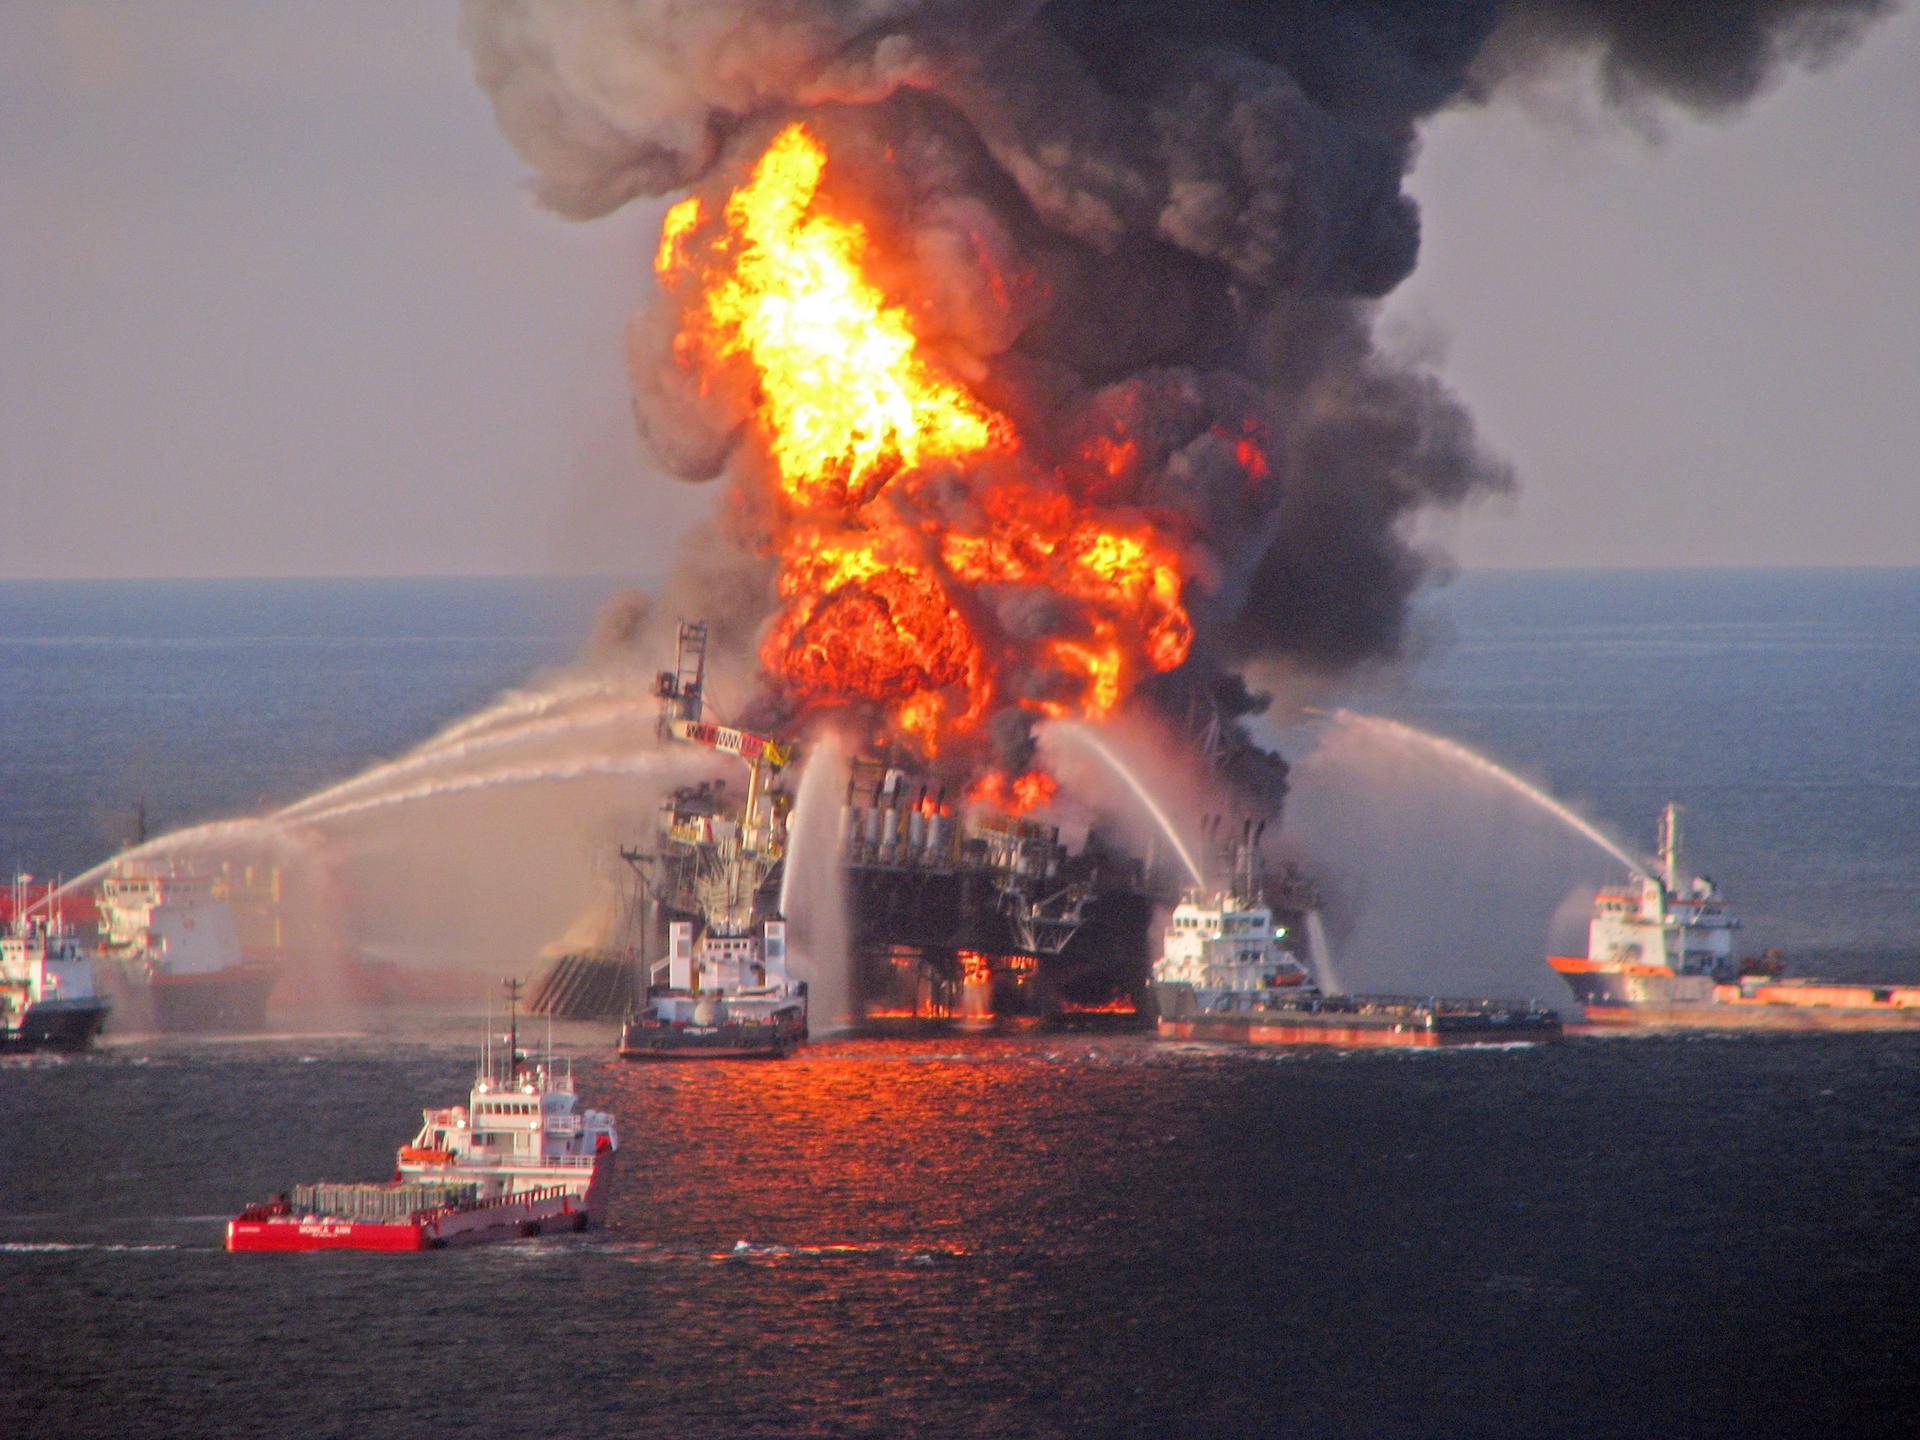 Halliburton, accused of doing defective work on BP's Macondo well before it exploded in 2010, killing 11 men and dumping 4.9 million barrels of oil into the Gulf of Mexico. 